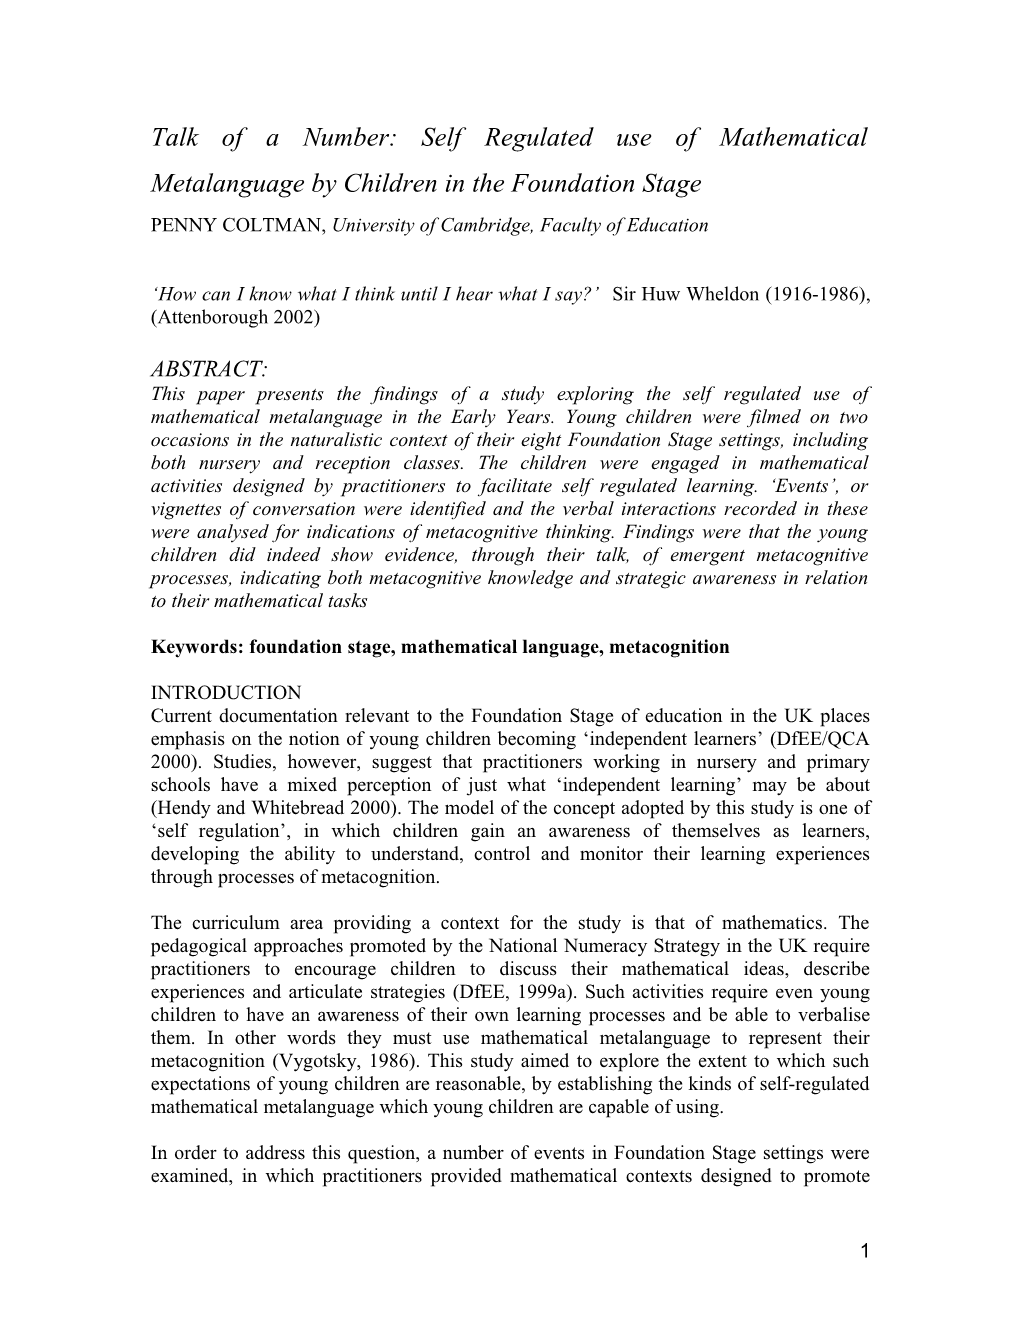 Think of a Number: Self Regulated Use of Mathematical Metalanguage by Children in the Foundation